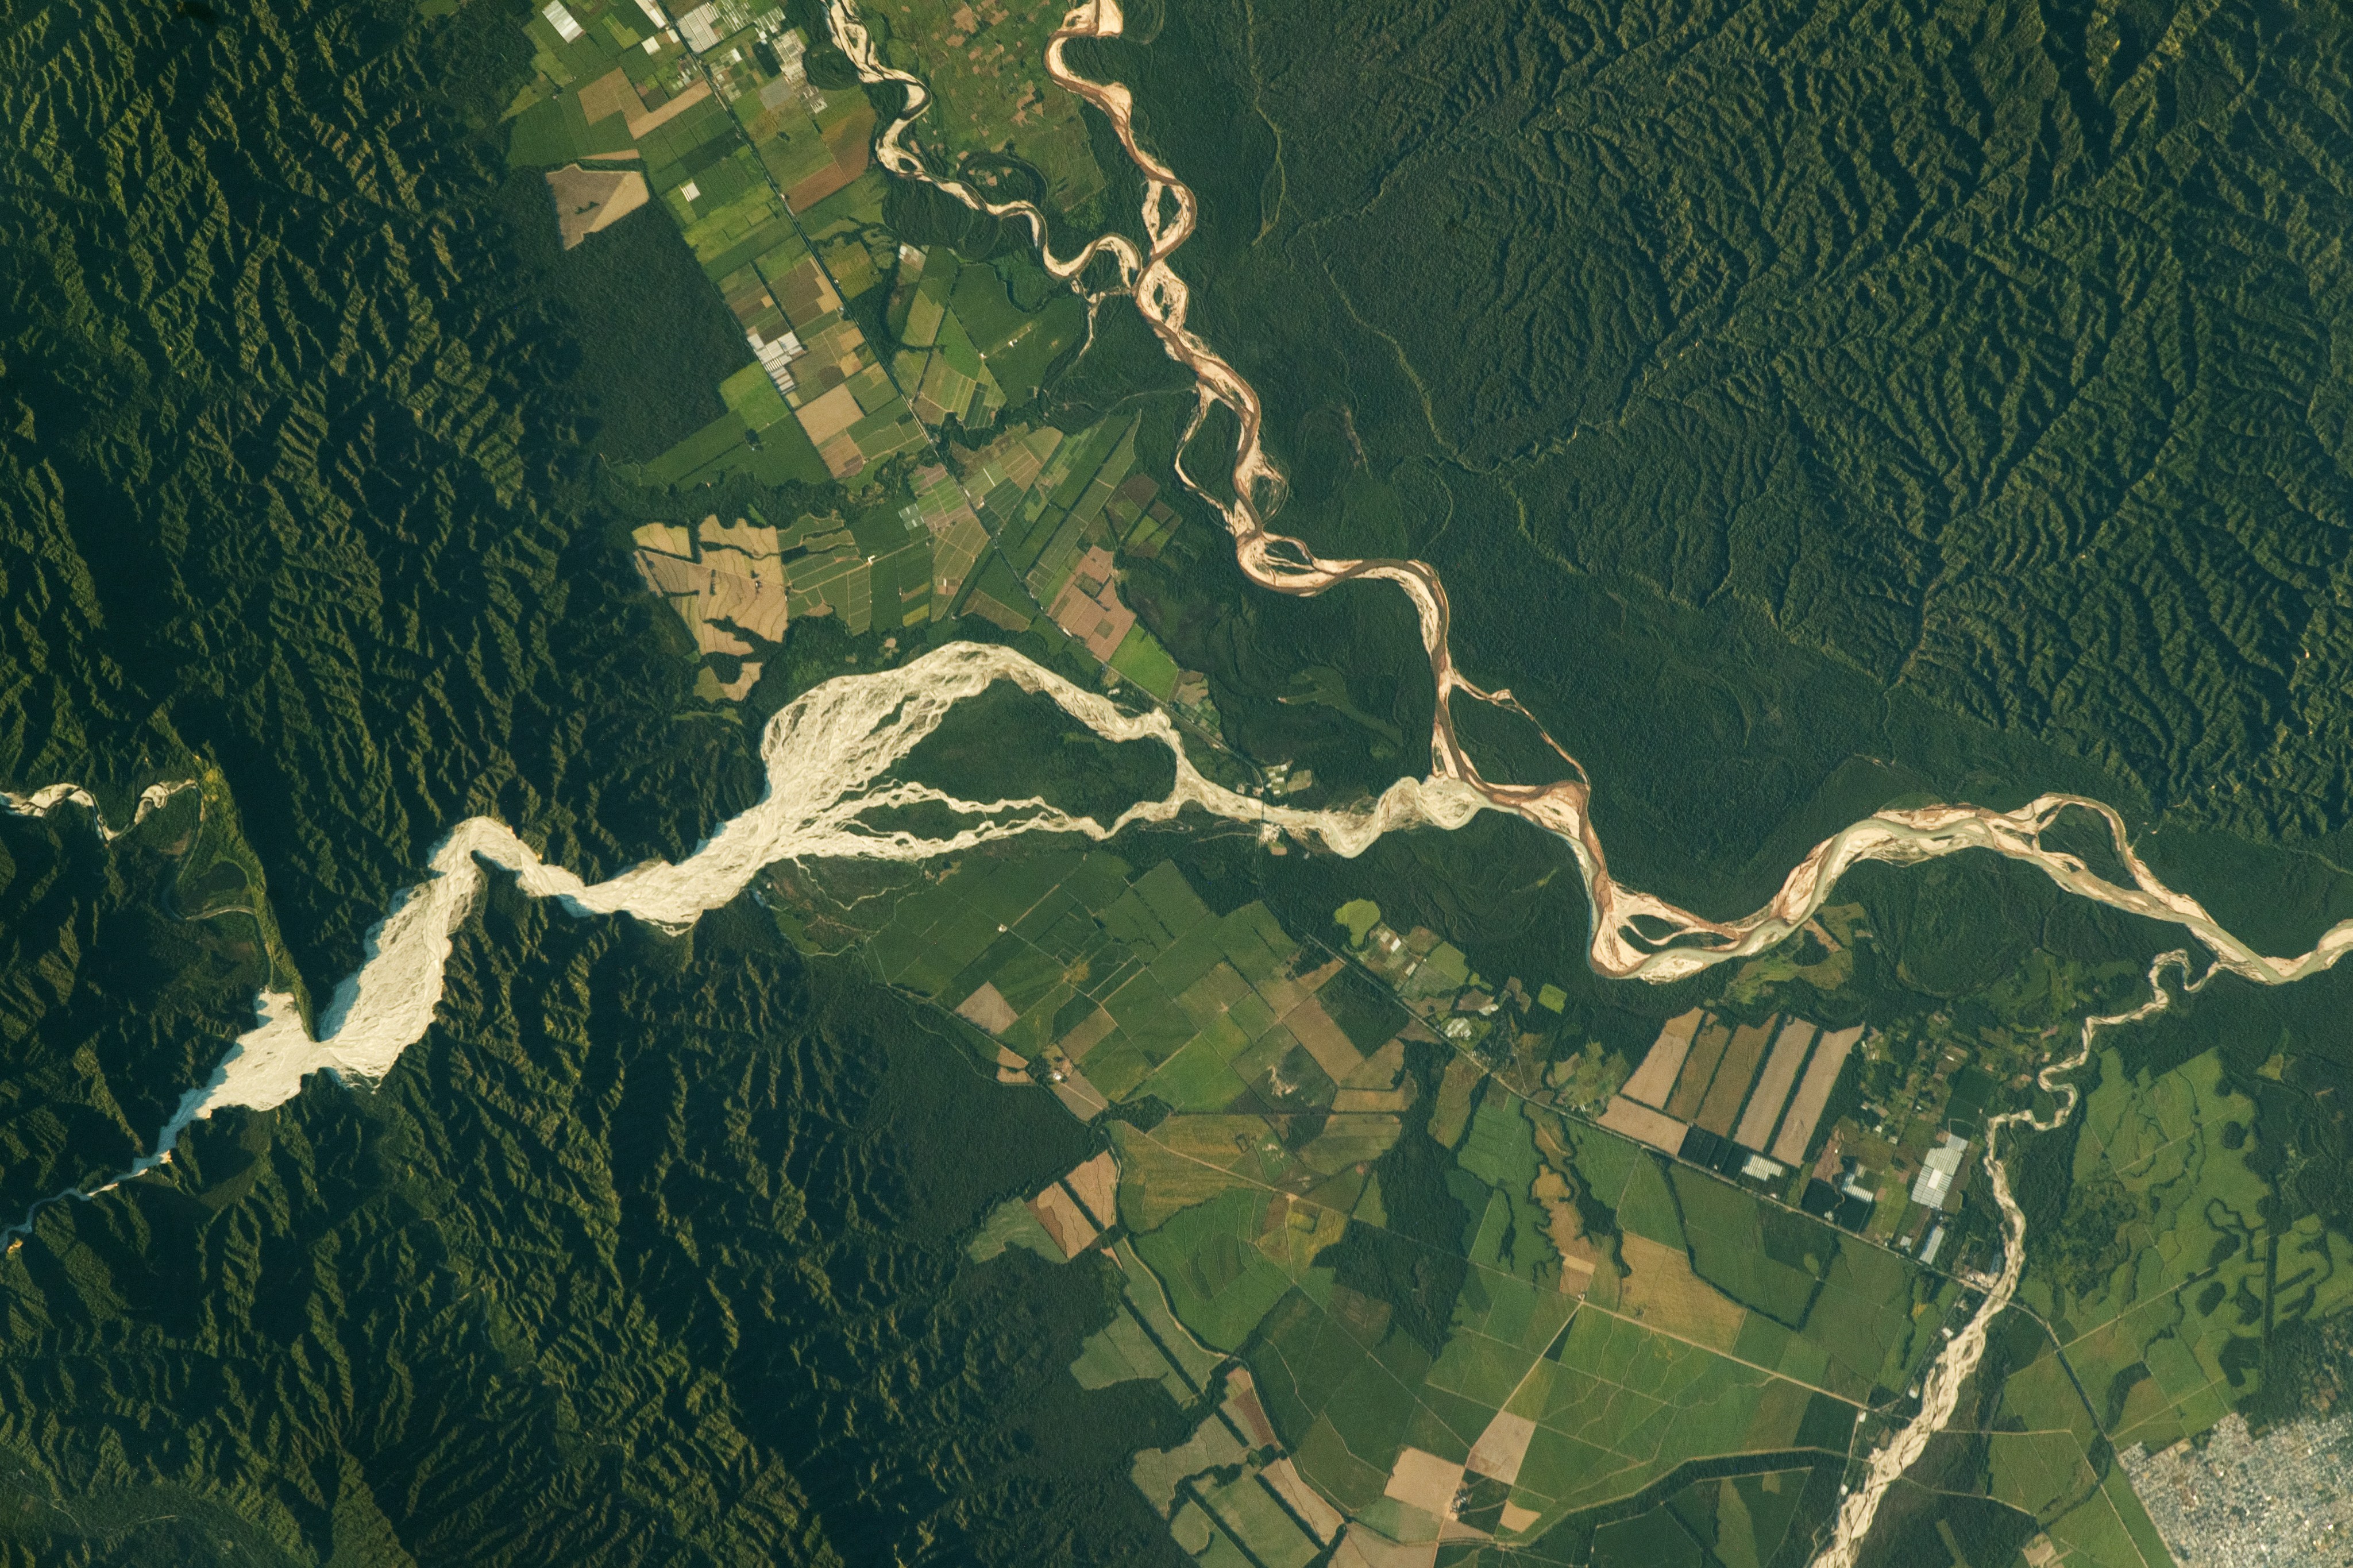 The photo shows the city of Orán (lower-right) and a small section of Aniceto Arce (top), a Bolivian province that is surrounded by the Bermejo River and Río Grande de Tarija. The meandering rivers in this image are sourced in the Andes Mountains and generally flow southeast through valleys in the foothills—the region between the high mountains and plains. The Iruya River deposits particles of silt and clay as it flows into the valley centered in this image.